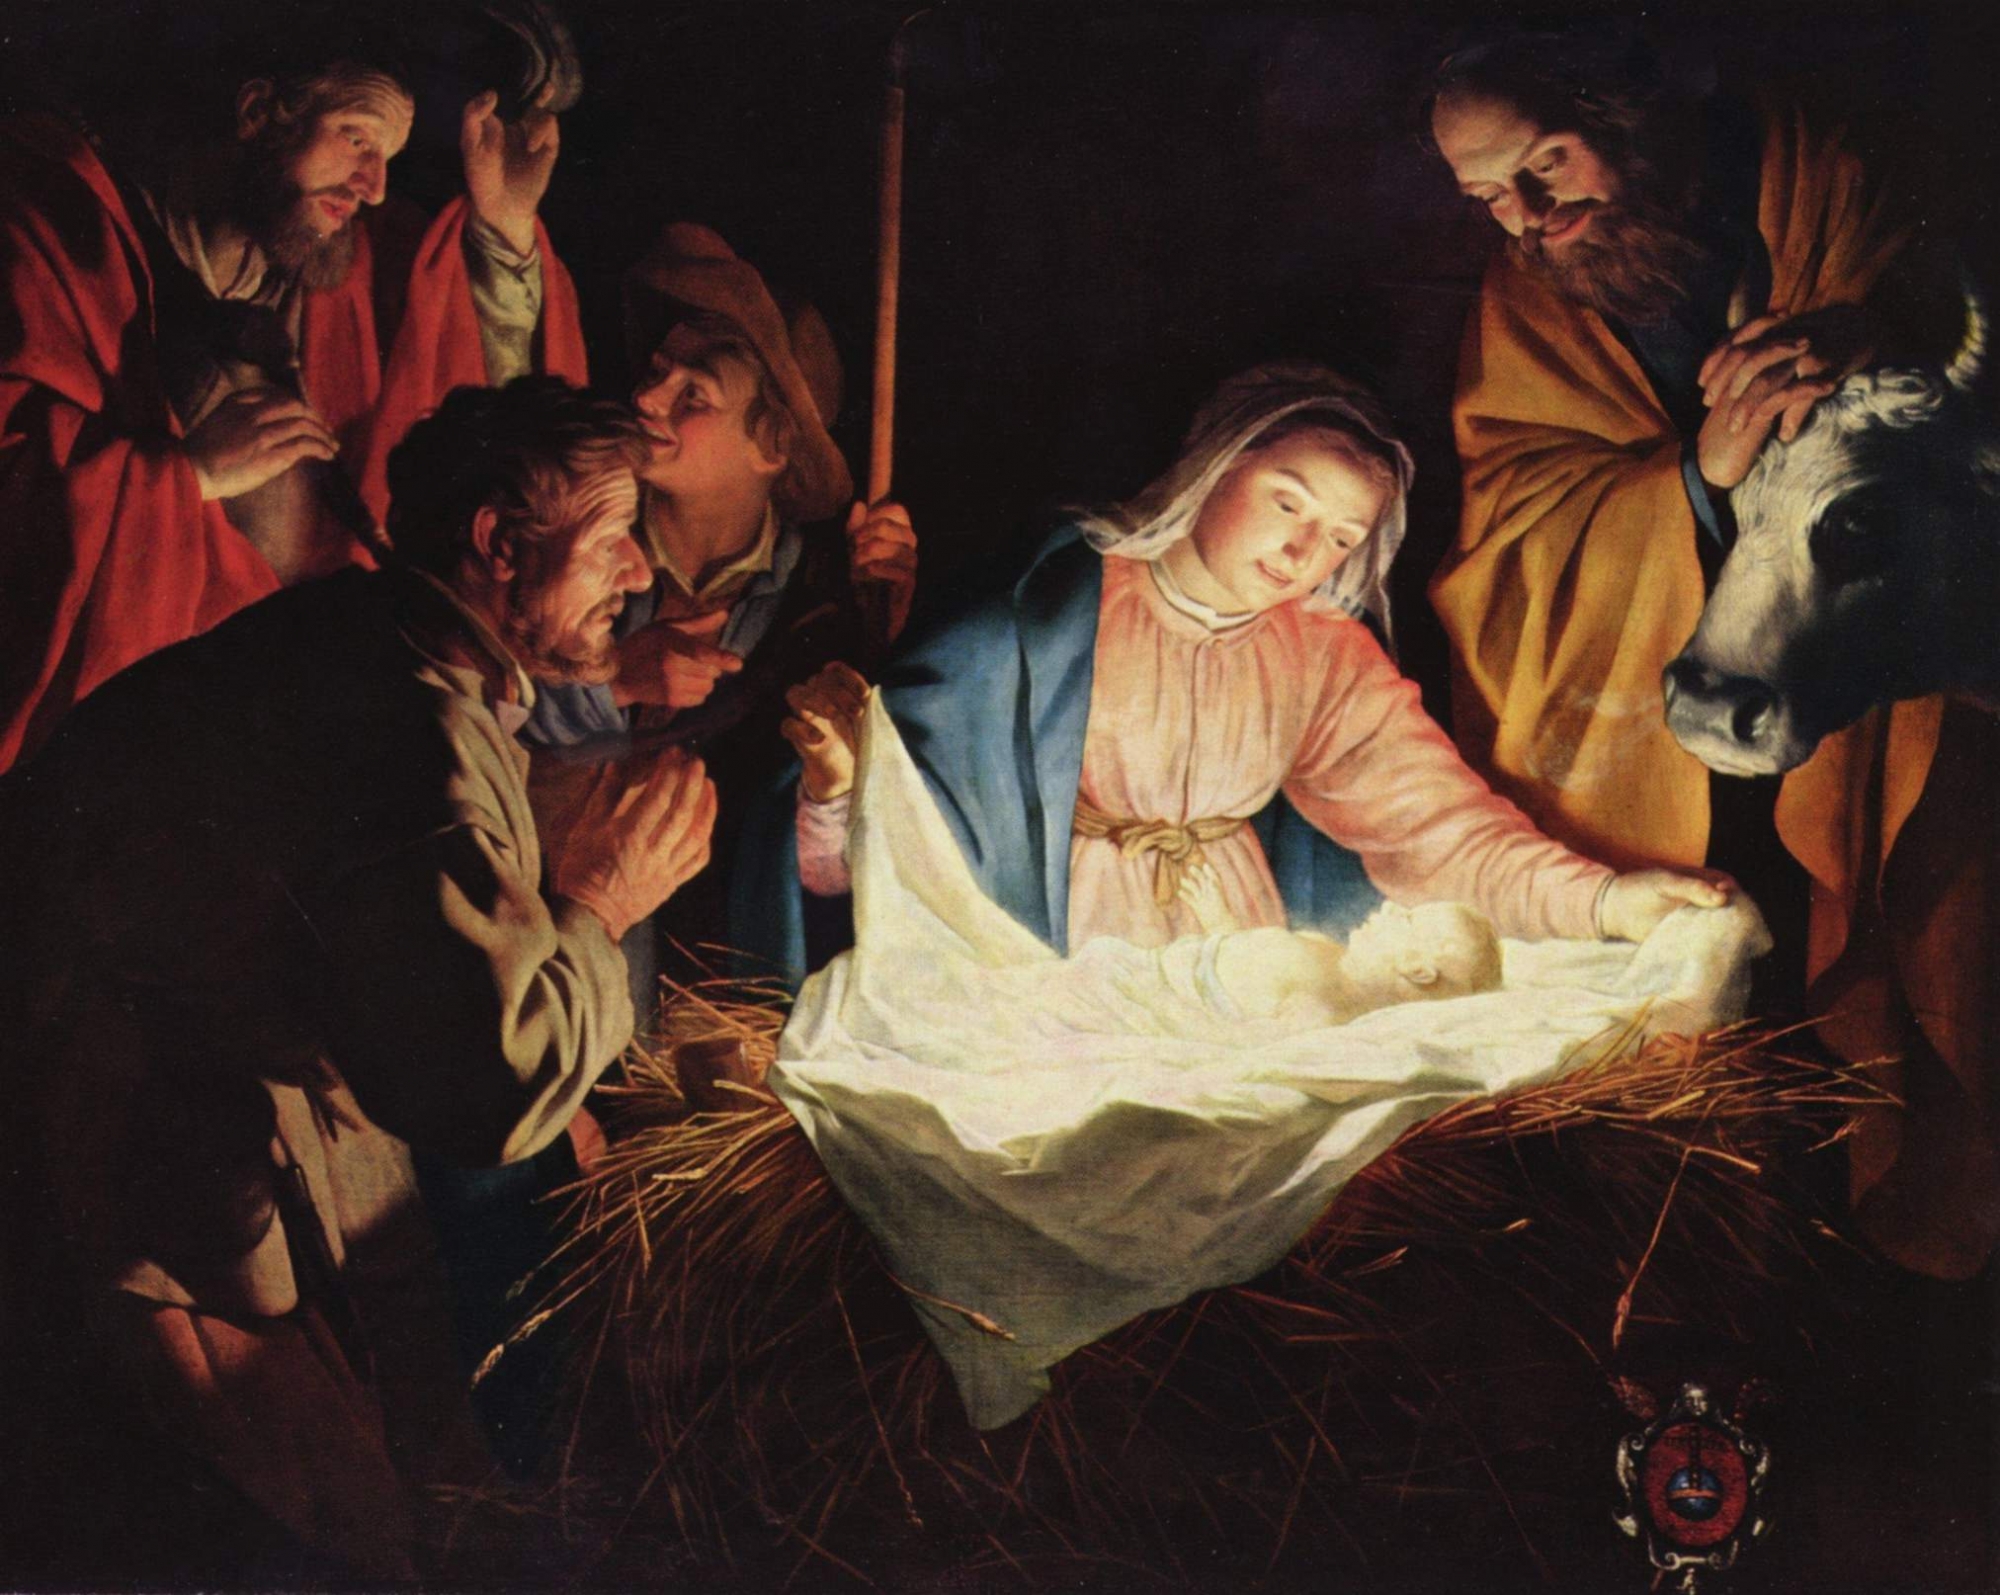 The Adoration of the Shepherds, Gerard van Honthorst, 1622. Wiki Commons.